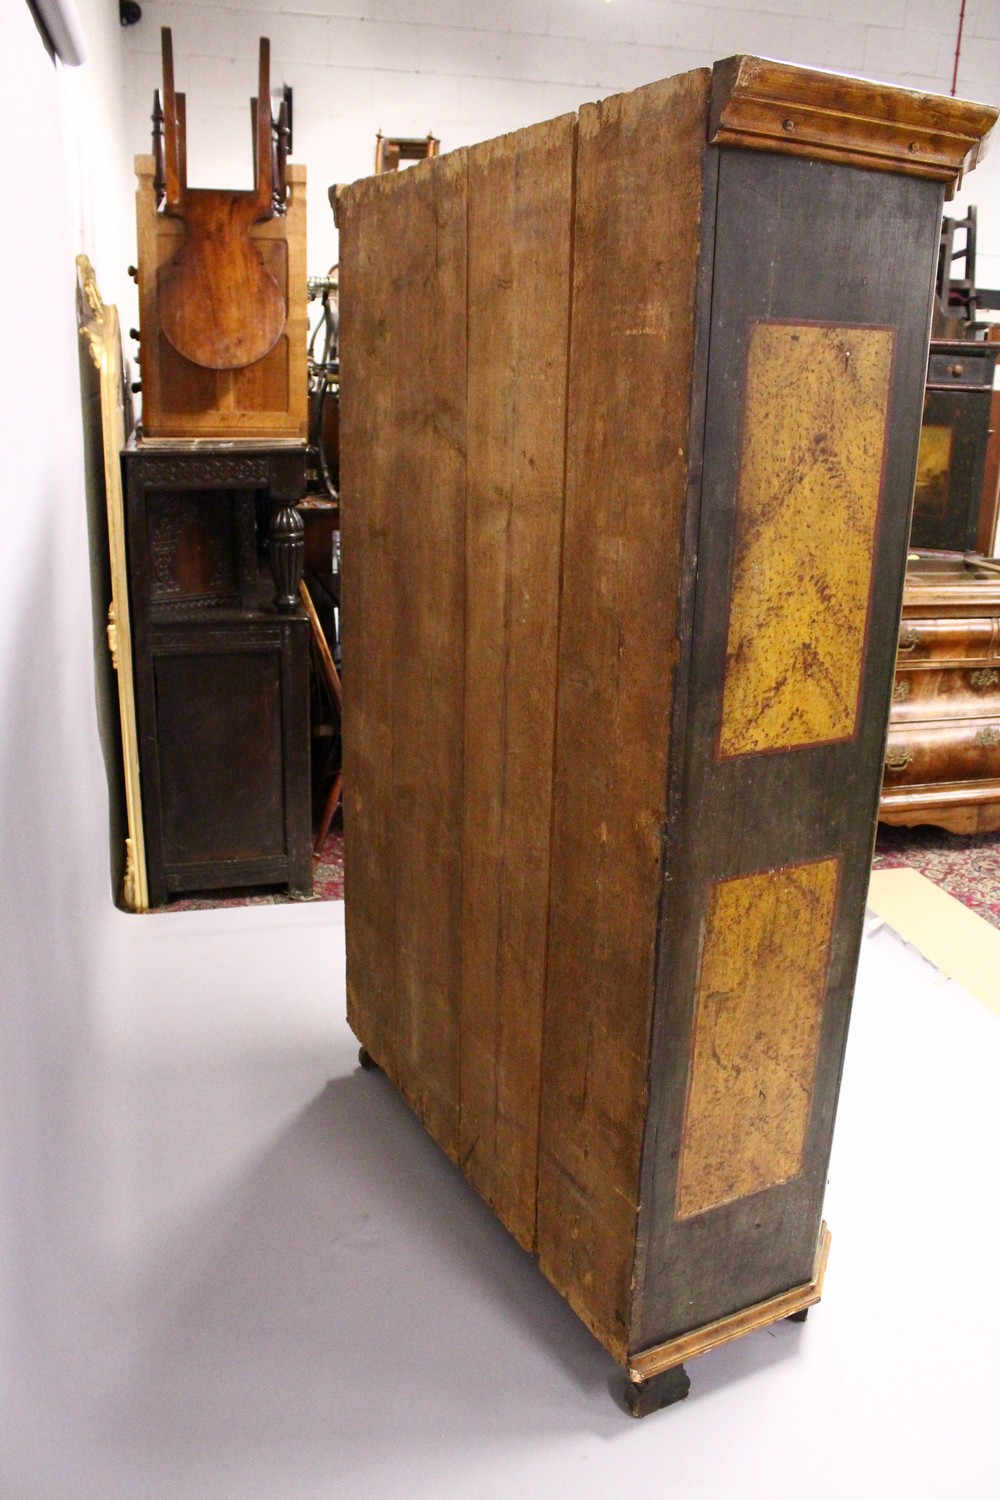 AN 18TH/19TH CENTURY AUSTRIAN PAINTED PINE CUPBOARD, with a single door, canted sides, all painted - Image 7 of 10